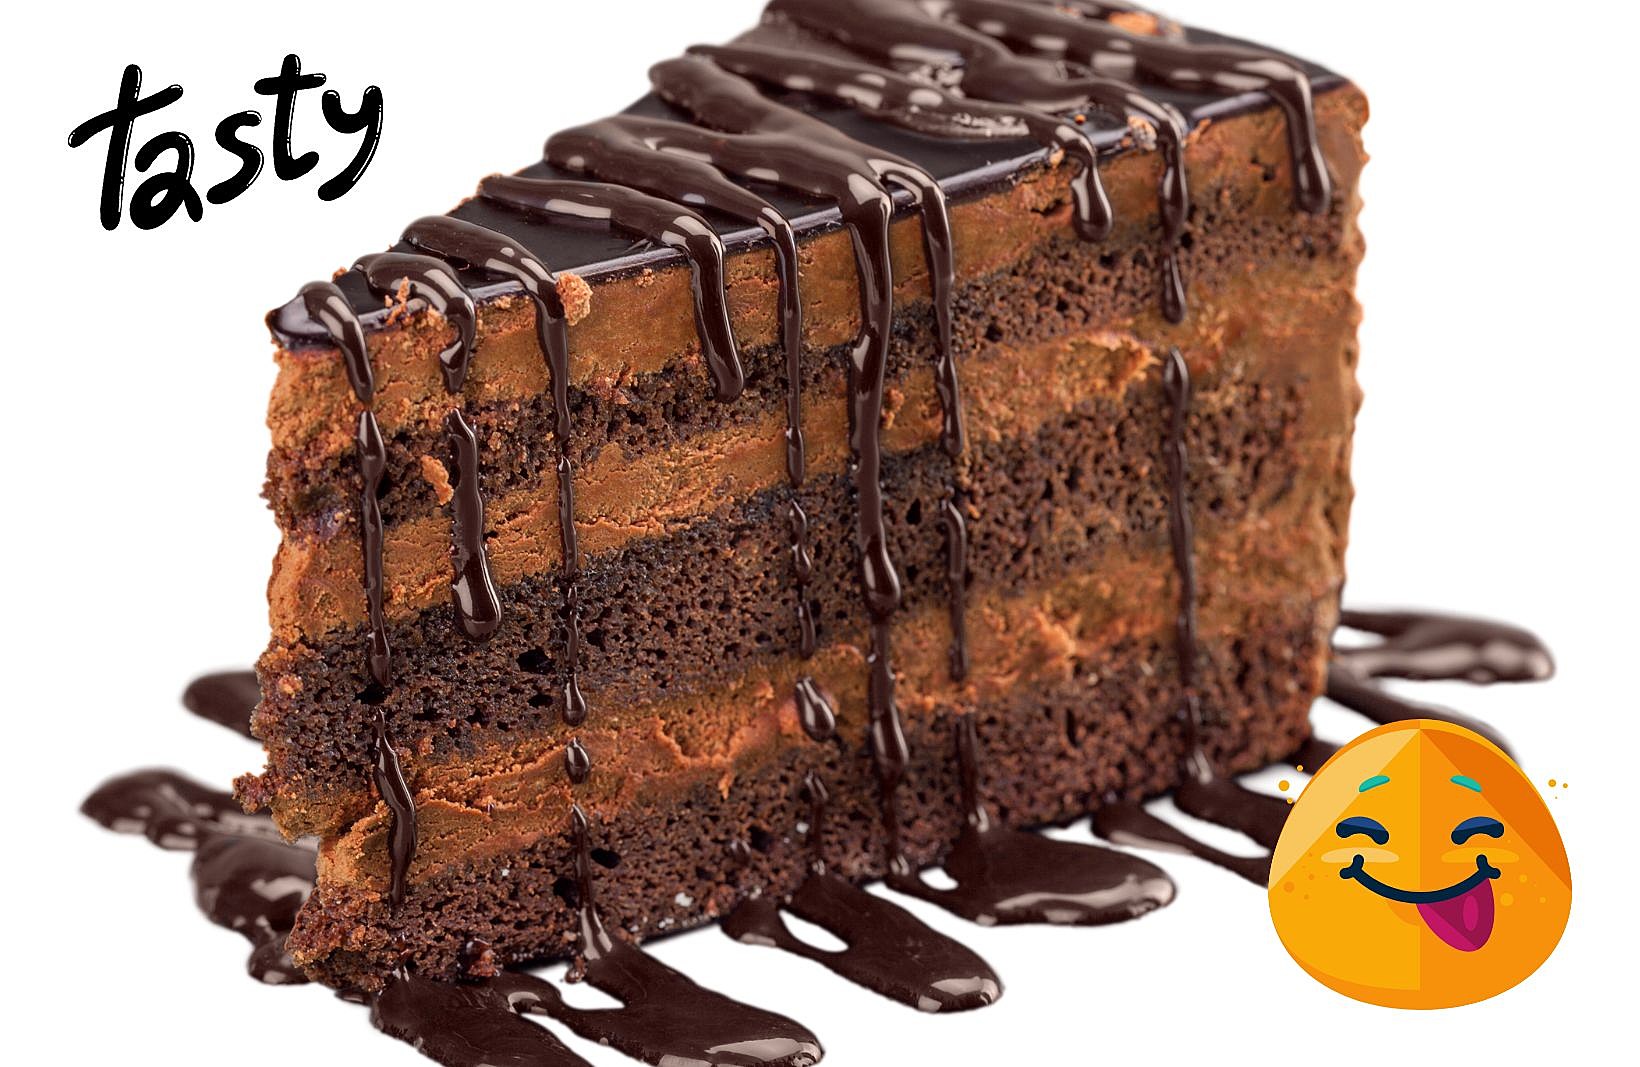 Carlo's Bakery Cake Boss Chocolate Fudge Cake, Small 6” Size - Serves 6 to  8 - Birthday Cakes and Treats for Delivery - Baked Fresh Daily, Delivered  Frozen in Dry Ice - Walmart.com